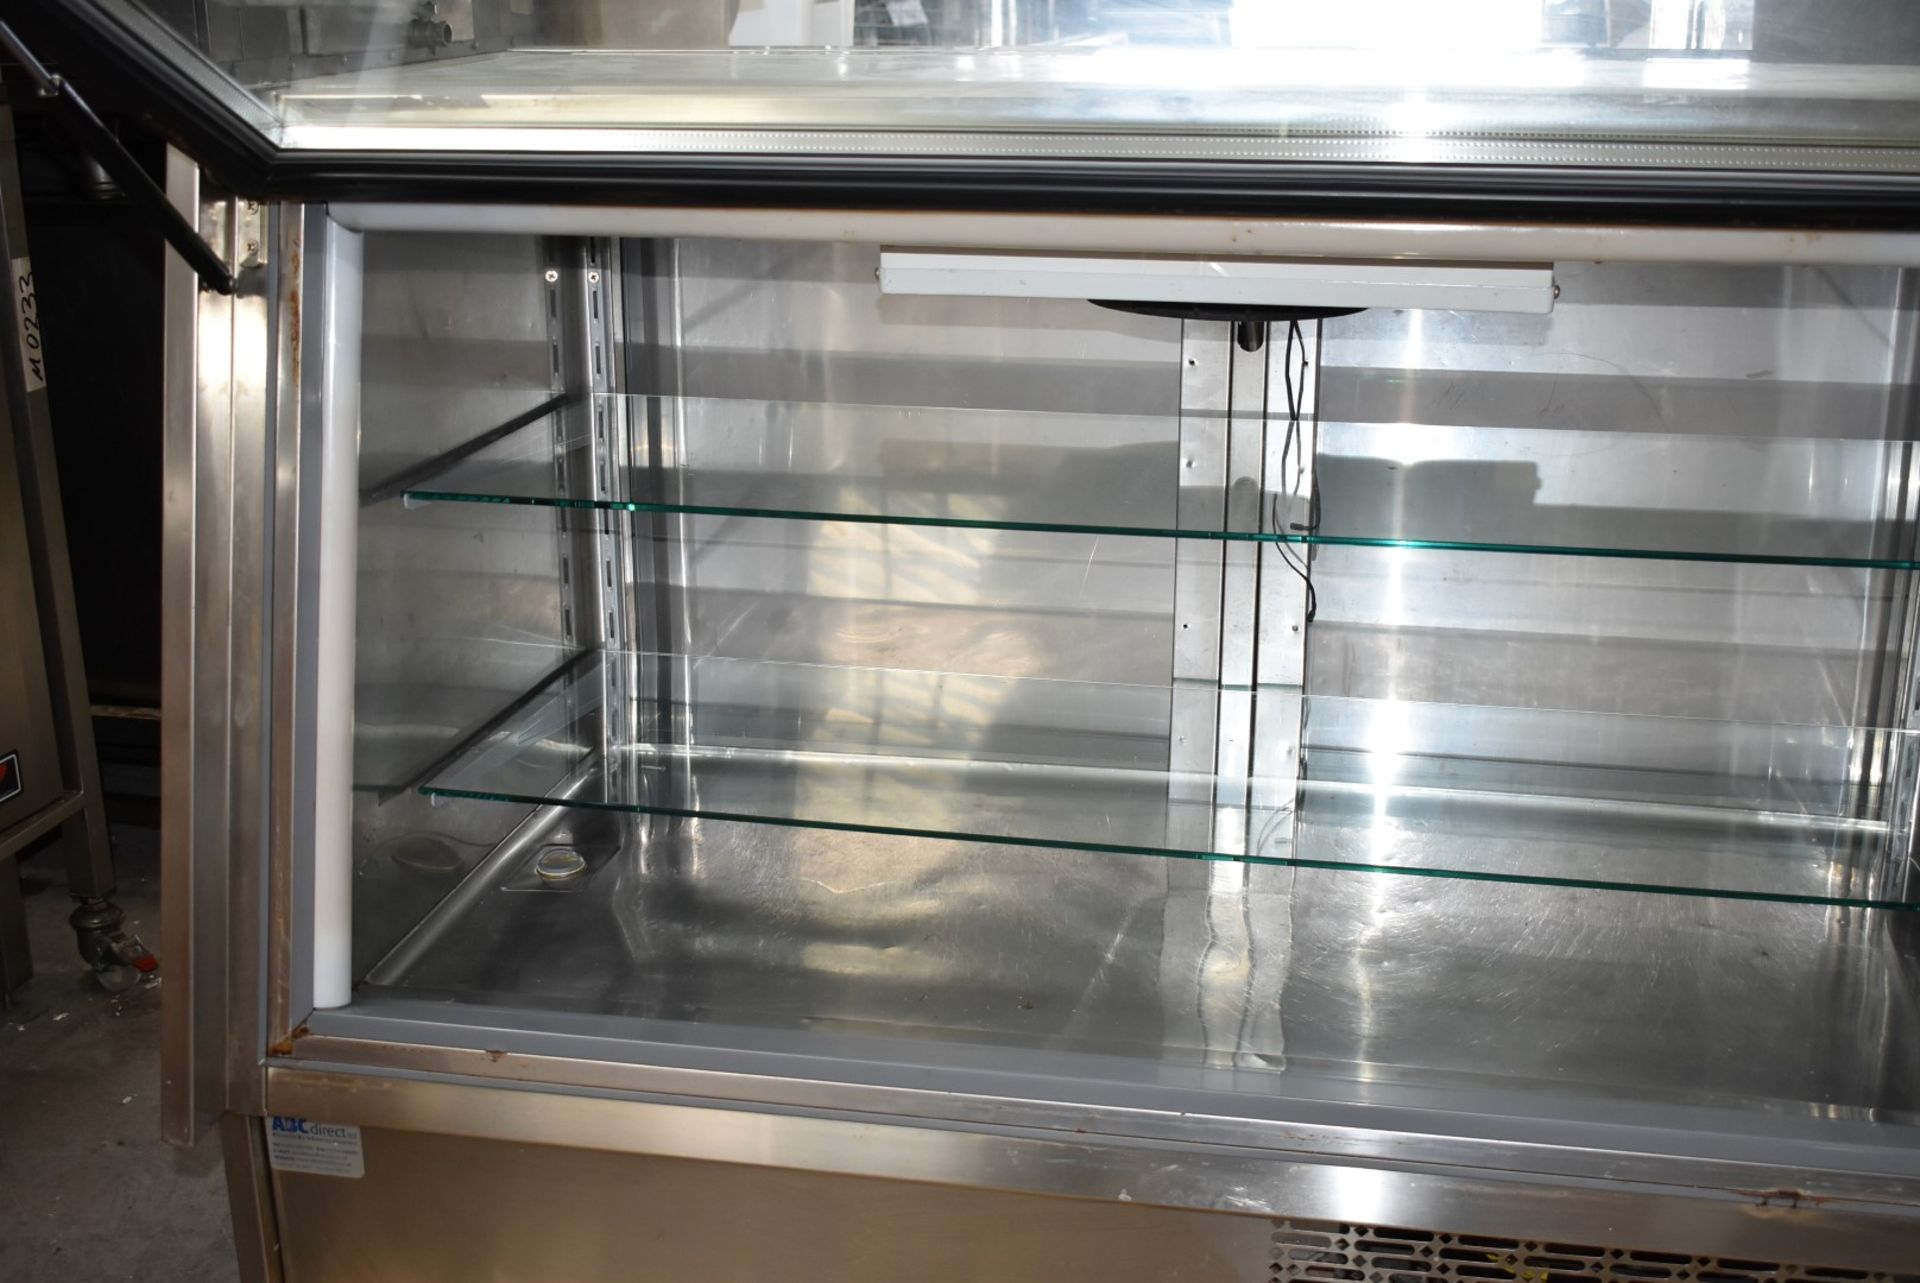 1 x Infrico 1.4m Refrigerated Vision Counter For Takeaways, Sandwich Shops or Cafes - RRP £3,200! - Image 11 of 21